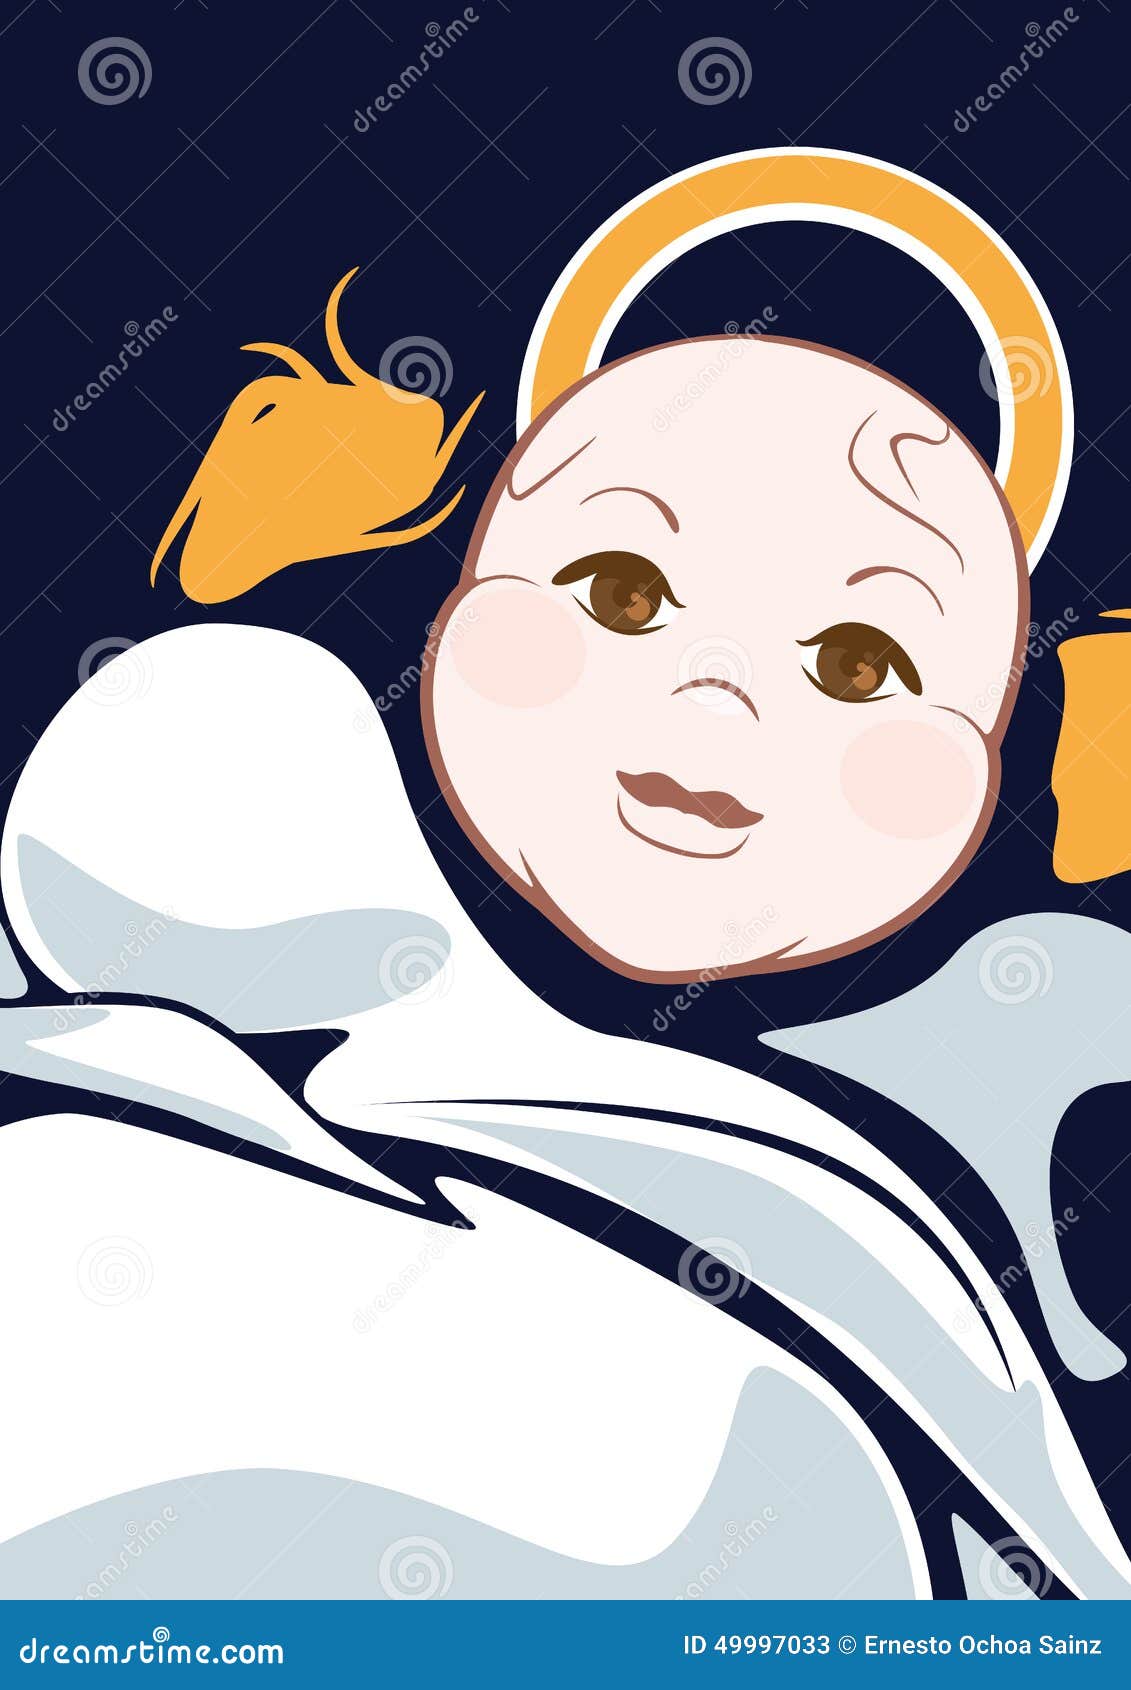 cartooned baby on cradle with abstract background; graphic 